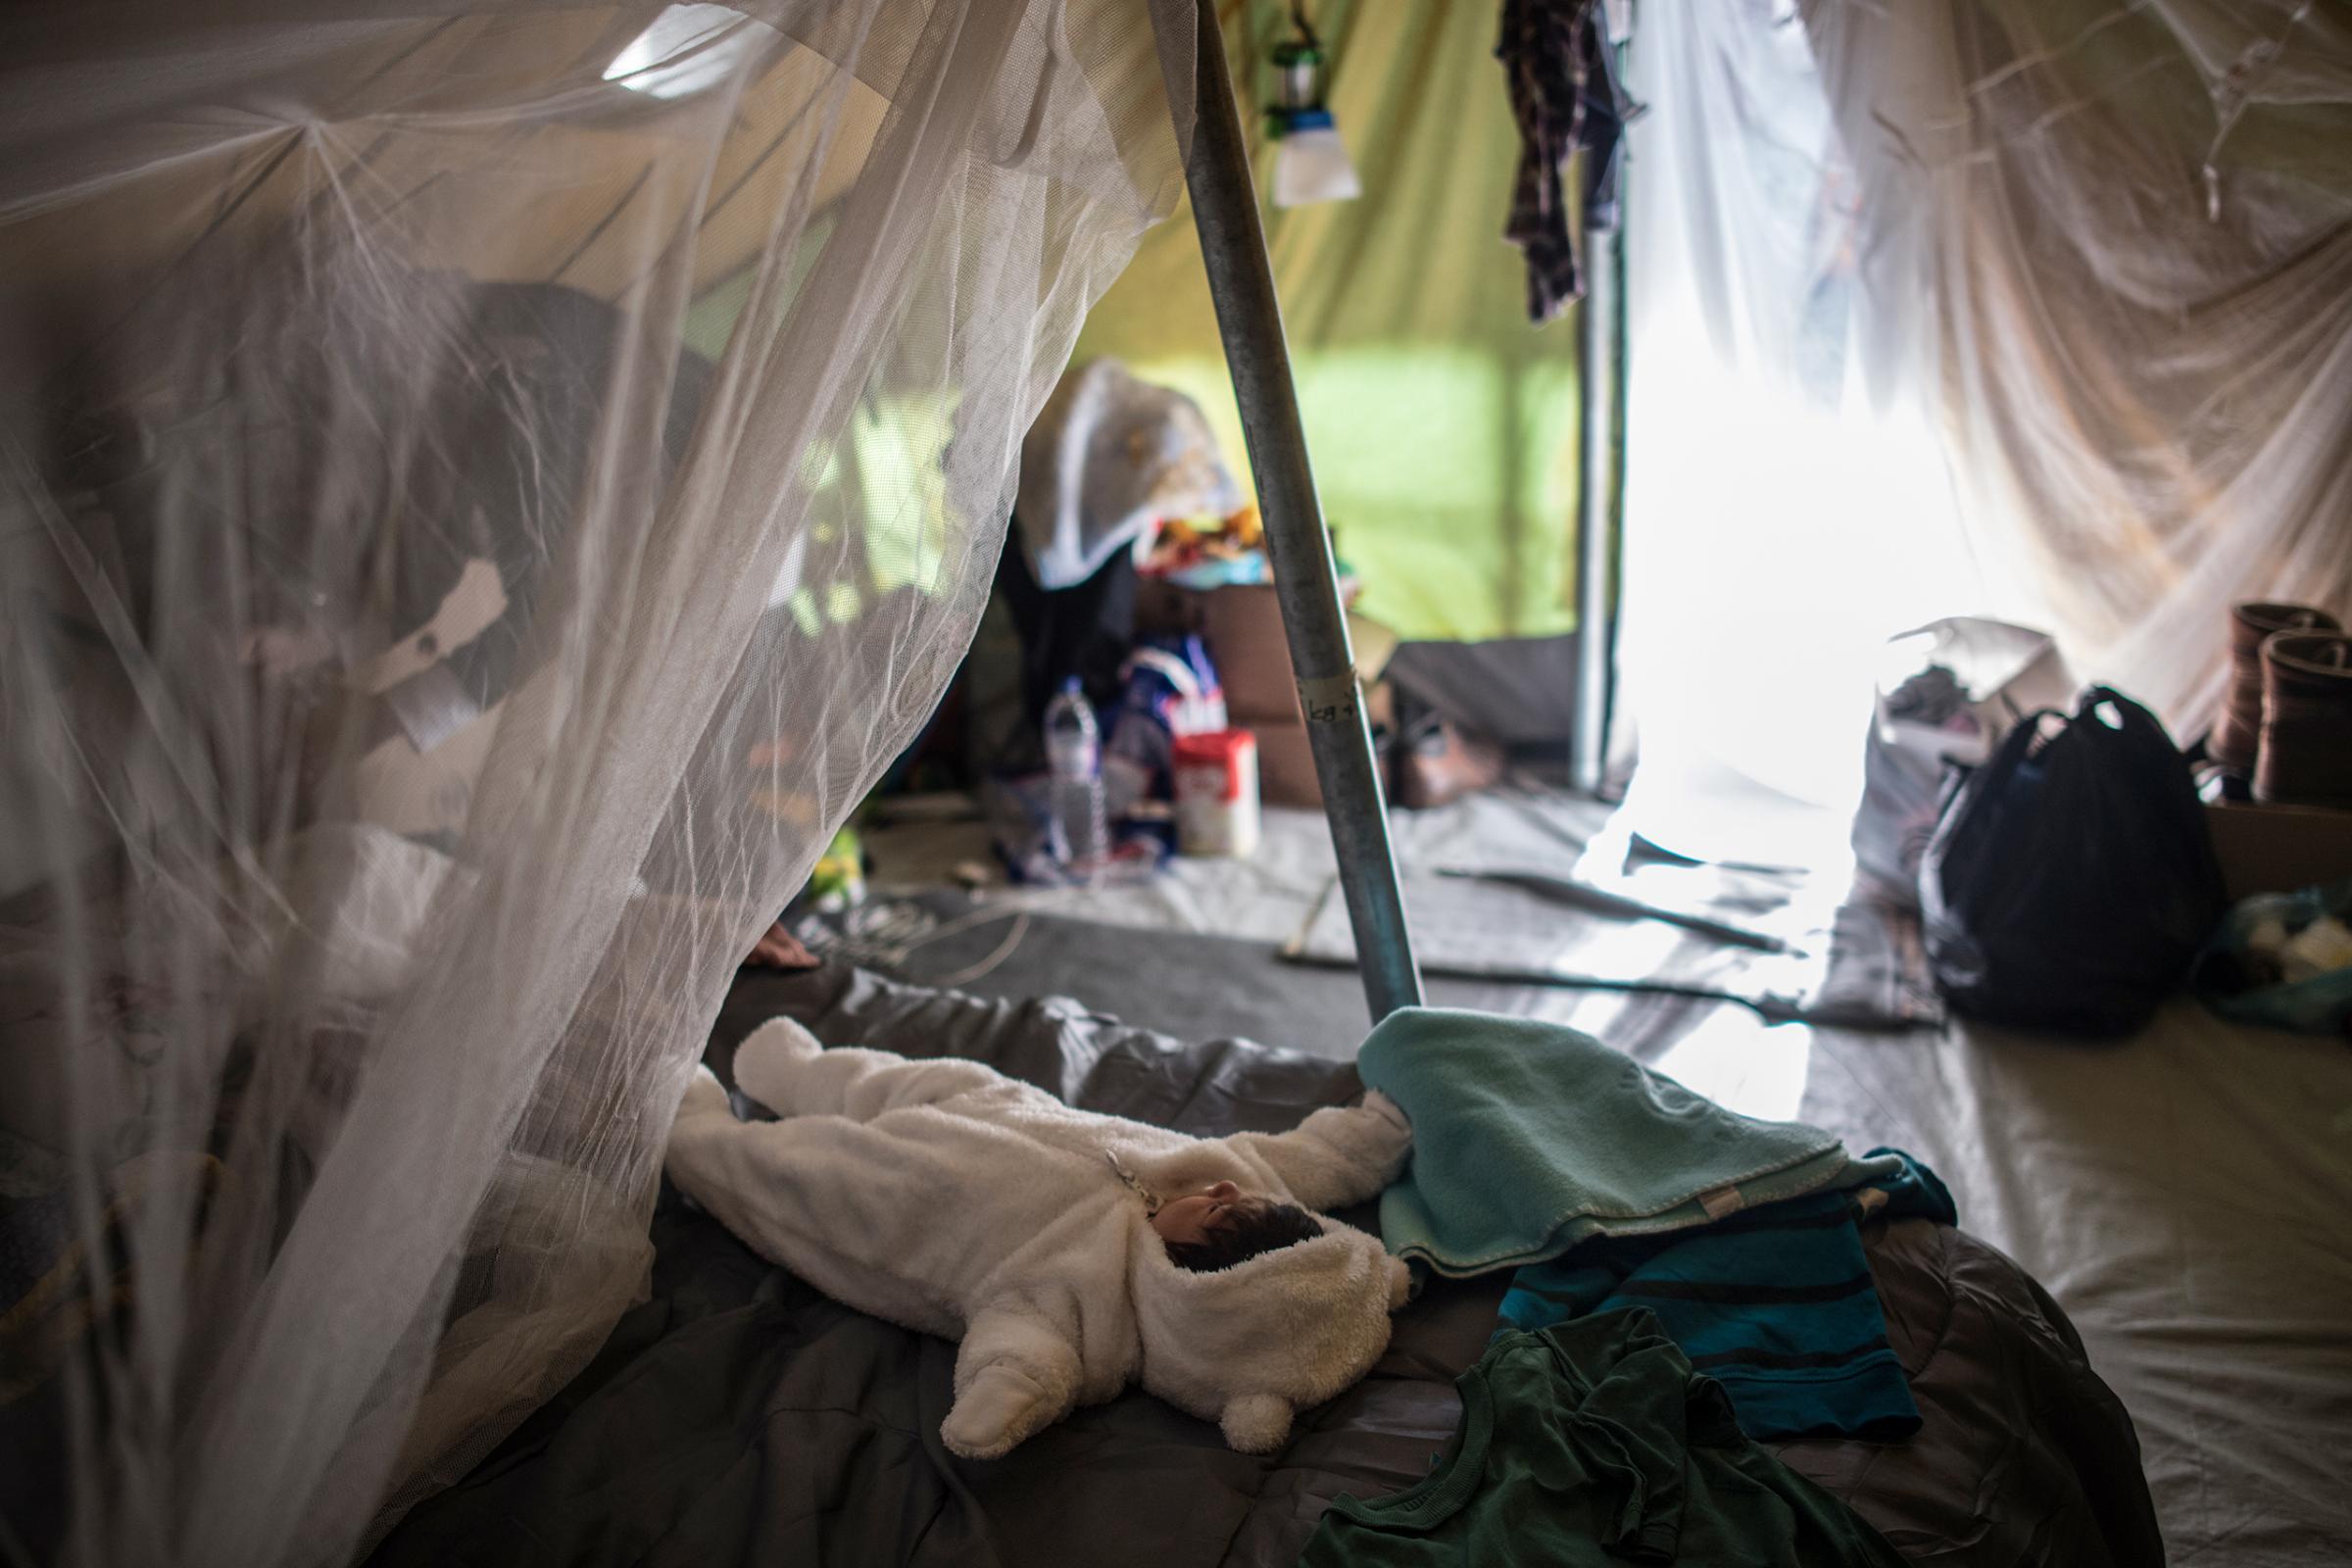 Syrian refugee Tayma Abzali, 24, straightens up her tent as her baby, Helen, born on Sept. 13, sleeps in a warm onesie at the Karamalis camp in Thessaloniki, Greece, on Nov. 10, 2016. Tayma, like other refugee mothers living in tents, is concerned about the onset of winter and cold temperatures in the tents—particularly those with new babies.